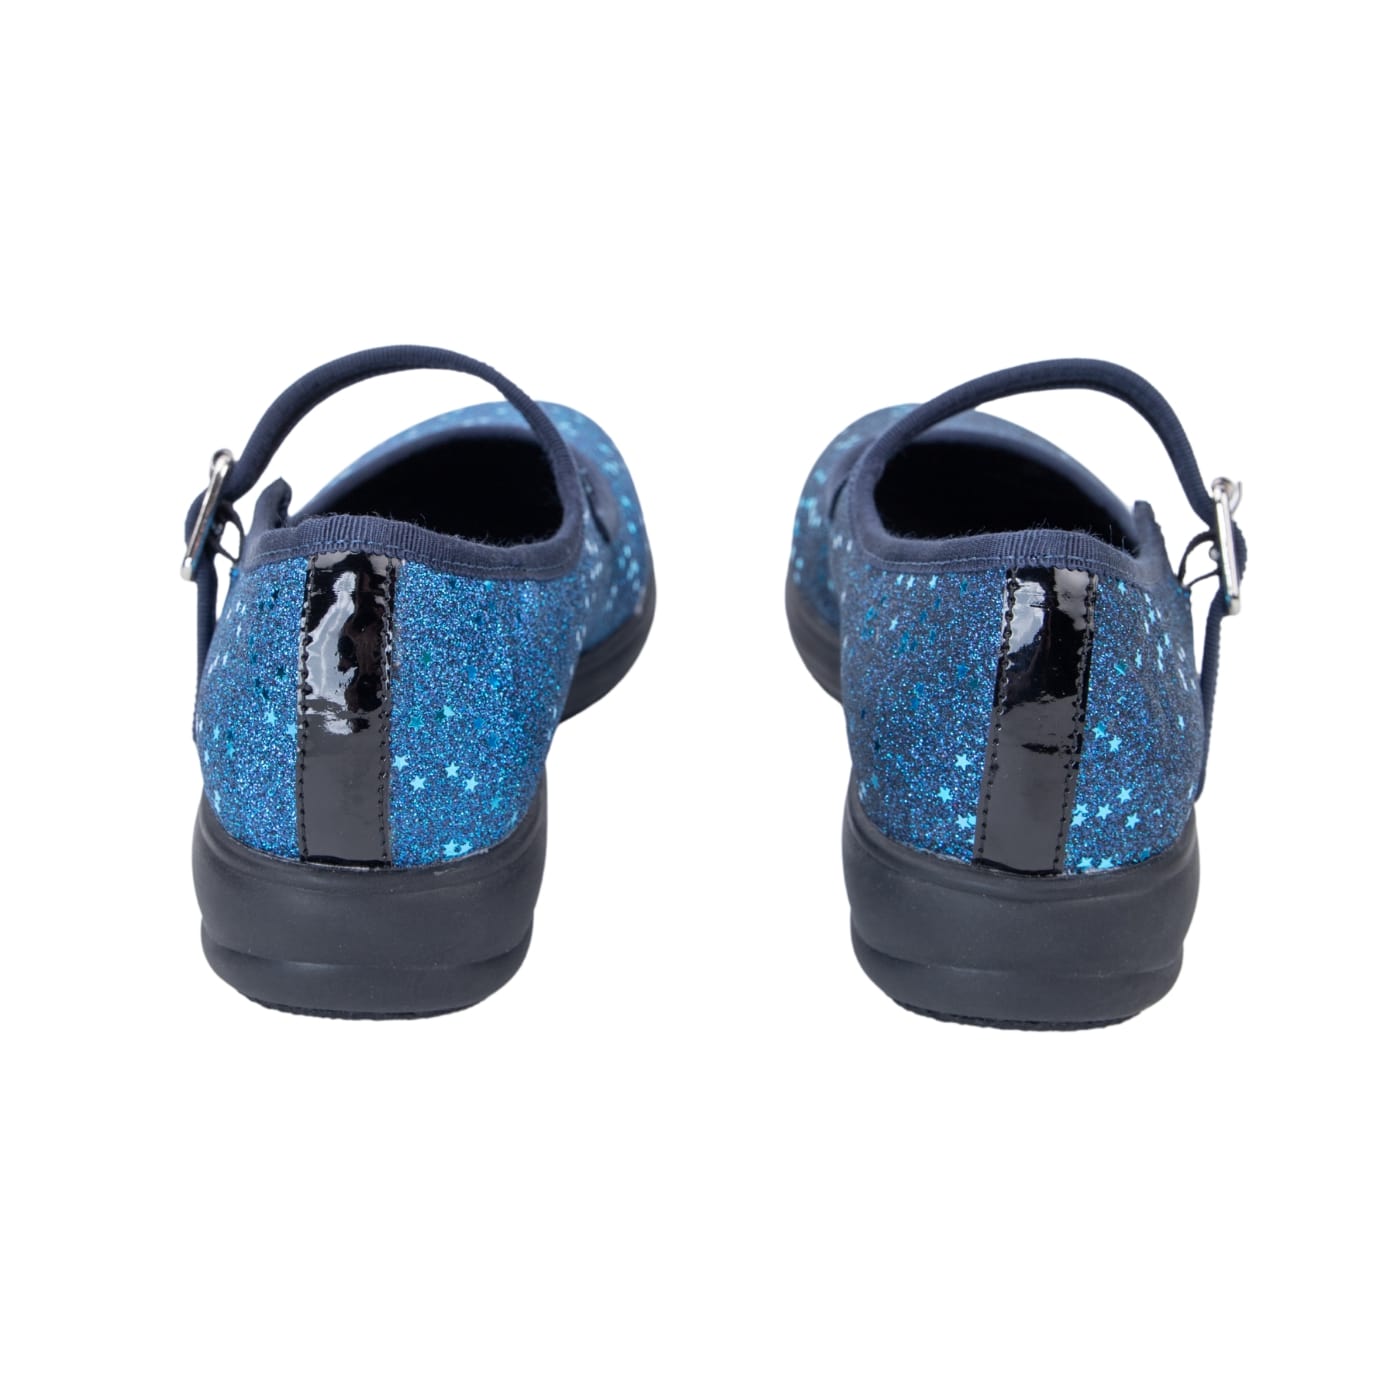 Sapphire Mary Janes by RainbowsAndFairies.com (Blue Glitter - Stars - Sparkle Shoes - Mary Janes - Buckle Up Shoes - Mismatched Shoes) - SKU: FW_MARYJ_SAPPH_ORG - Pic 05